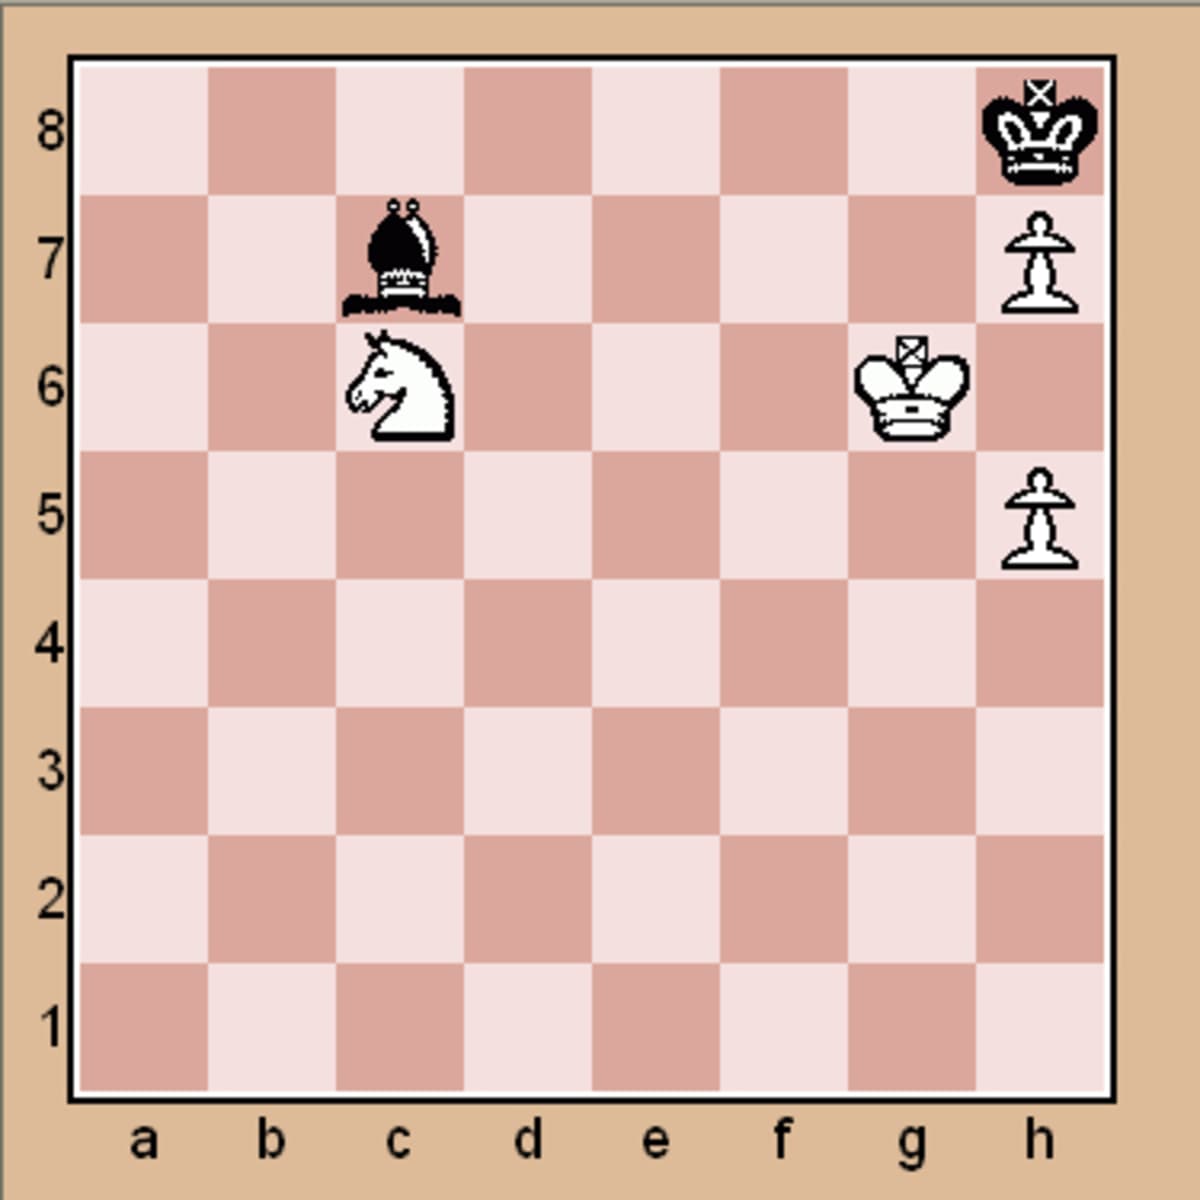 Mate in 1 Chess Puzzles - HubPages